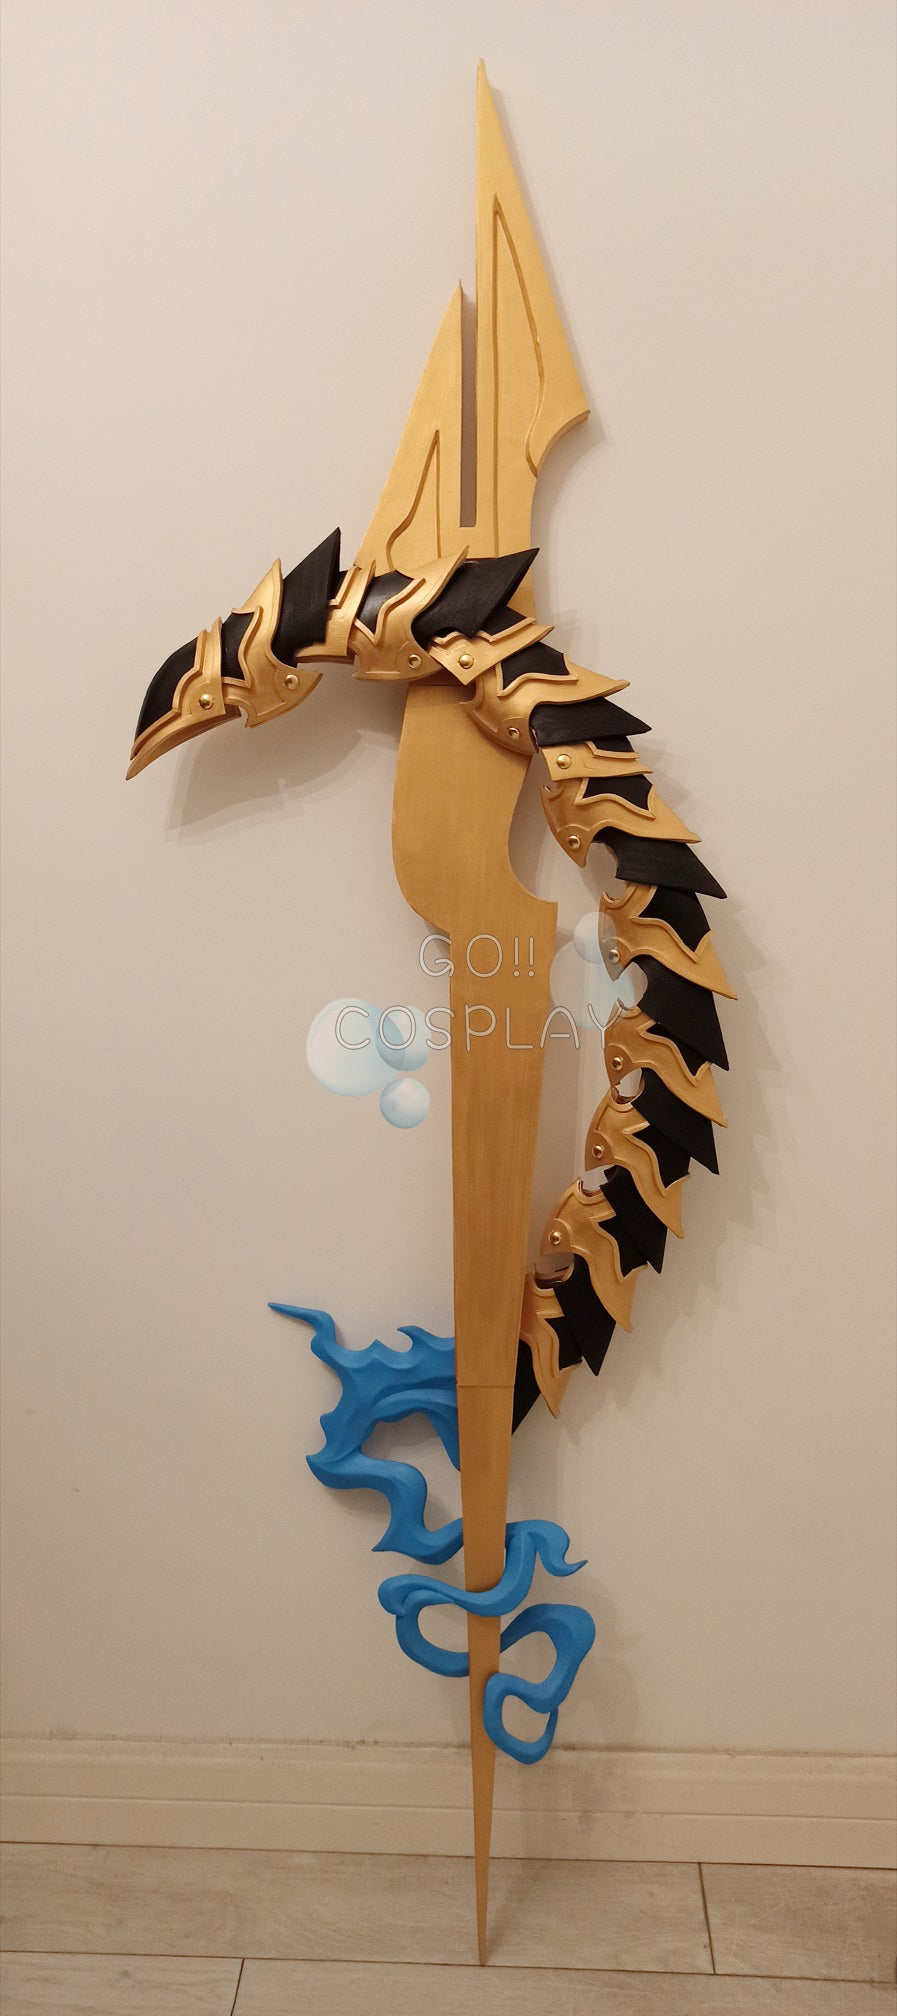 Asclepius F/GO Cosplay Replica BUY